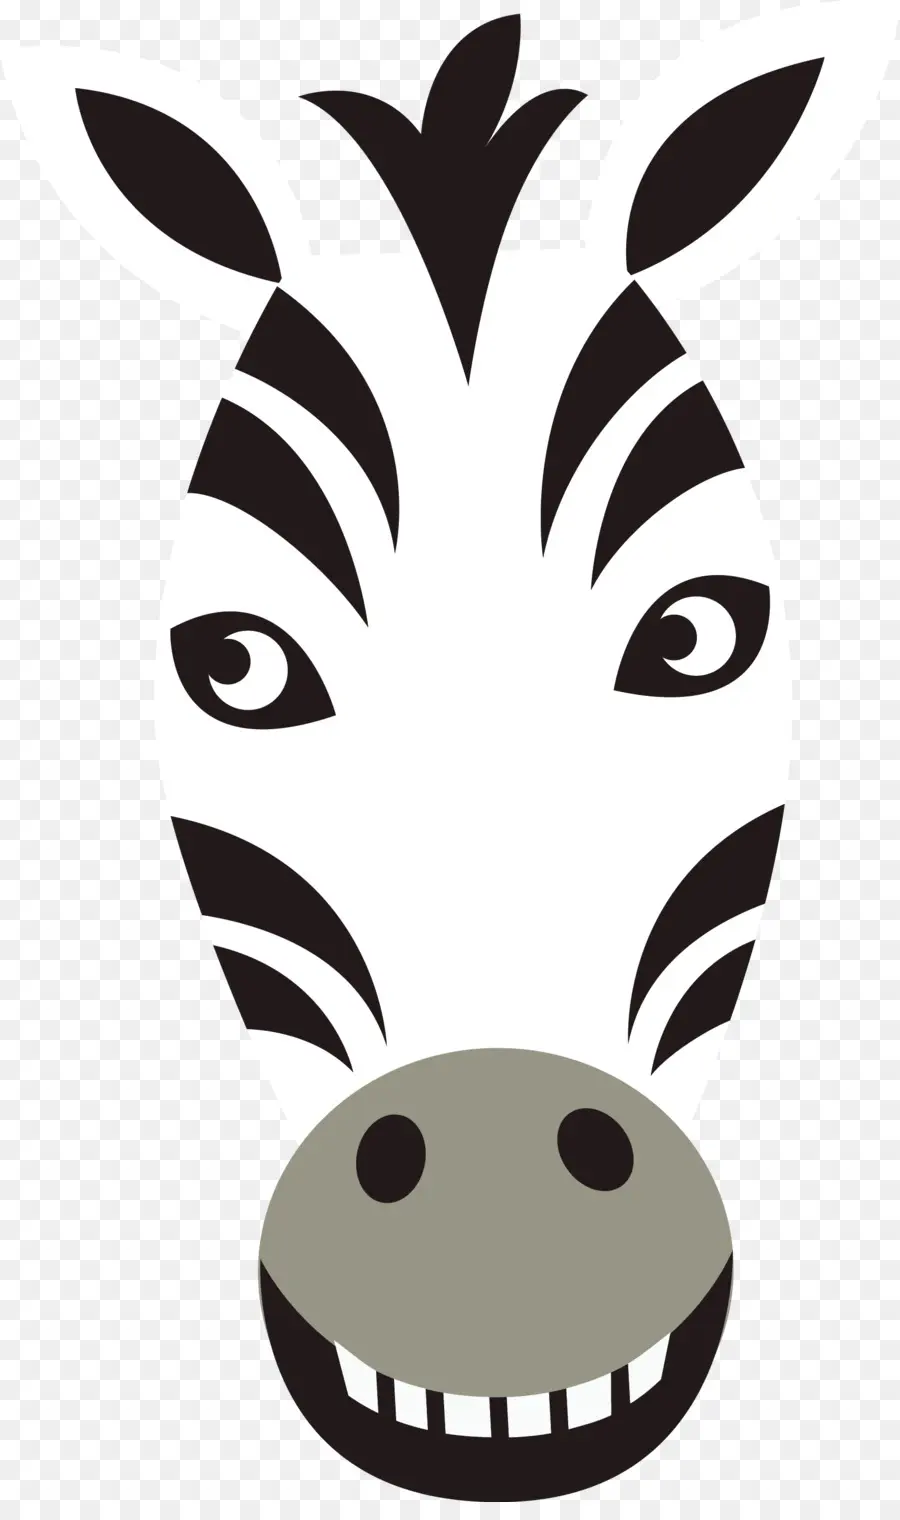 Sanglier，Cerf PNG